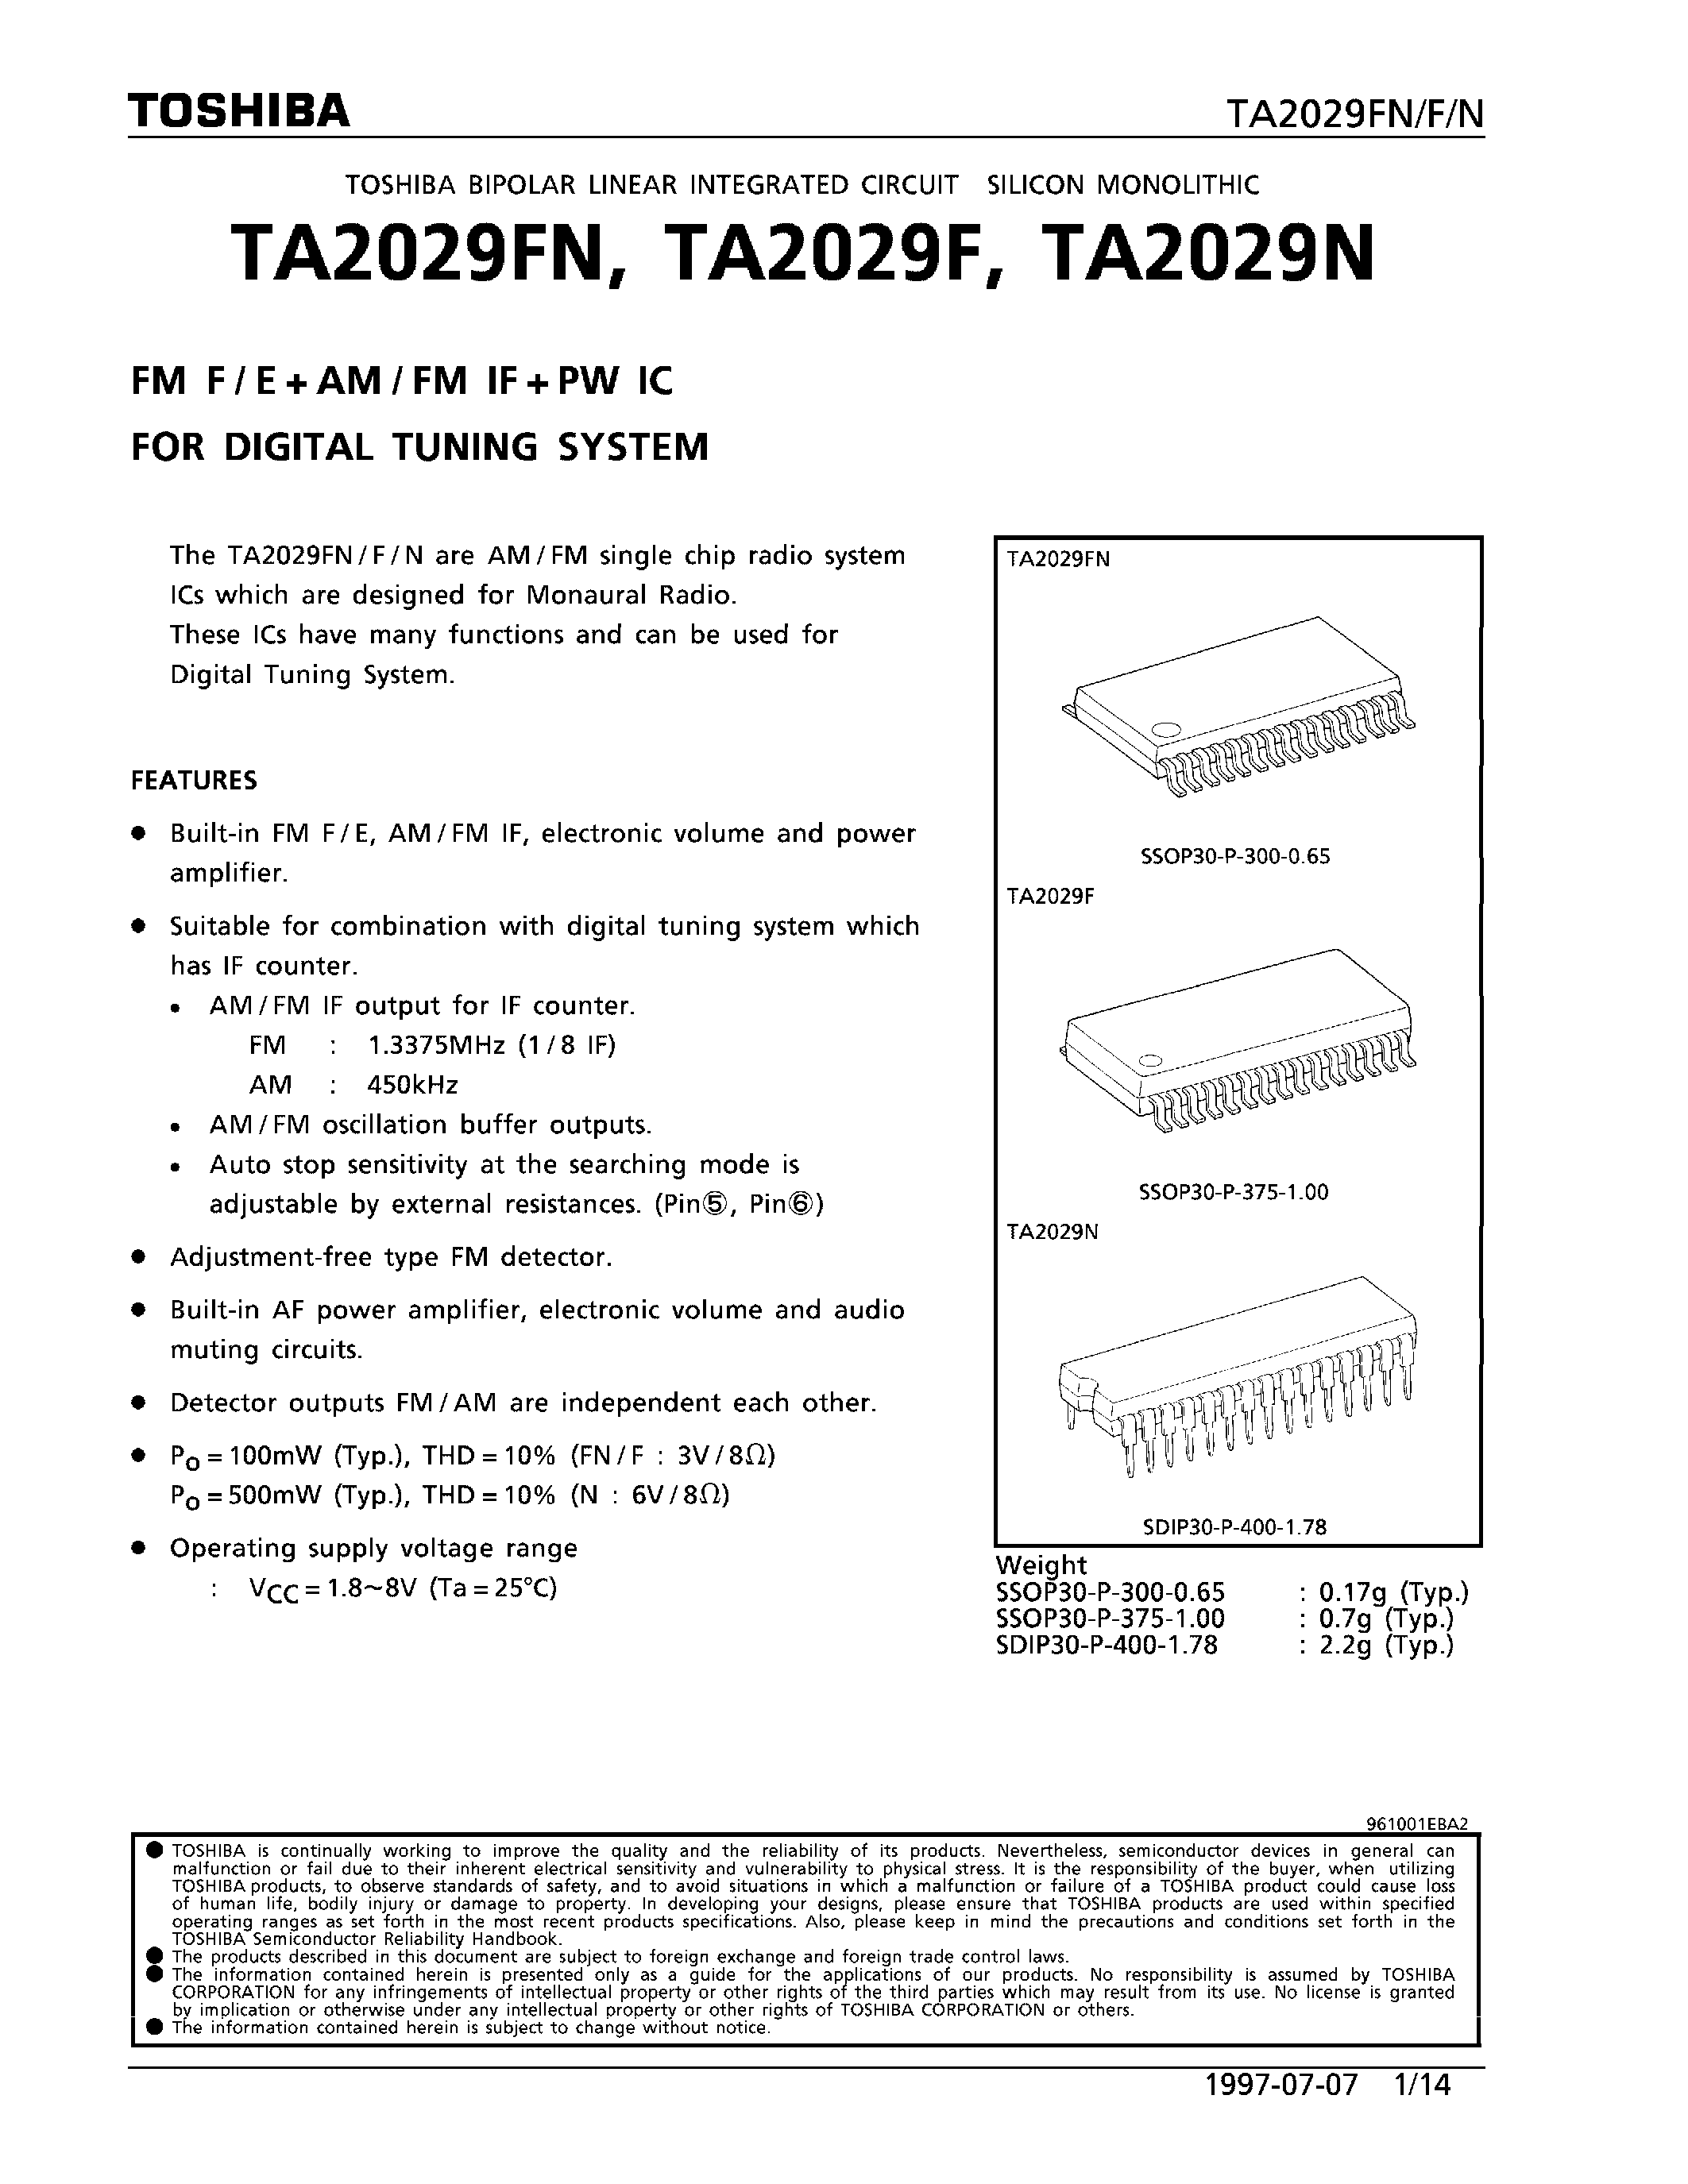 Datasheet TA2029 - FM F/E+AM/FM IF+PW IC FOR DIGITAL TUNING SYSTEM page 1